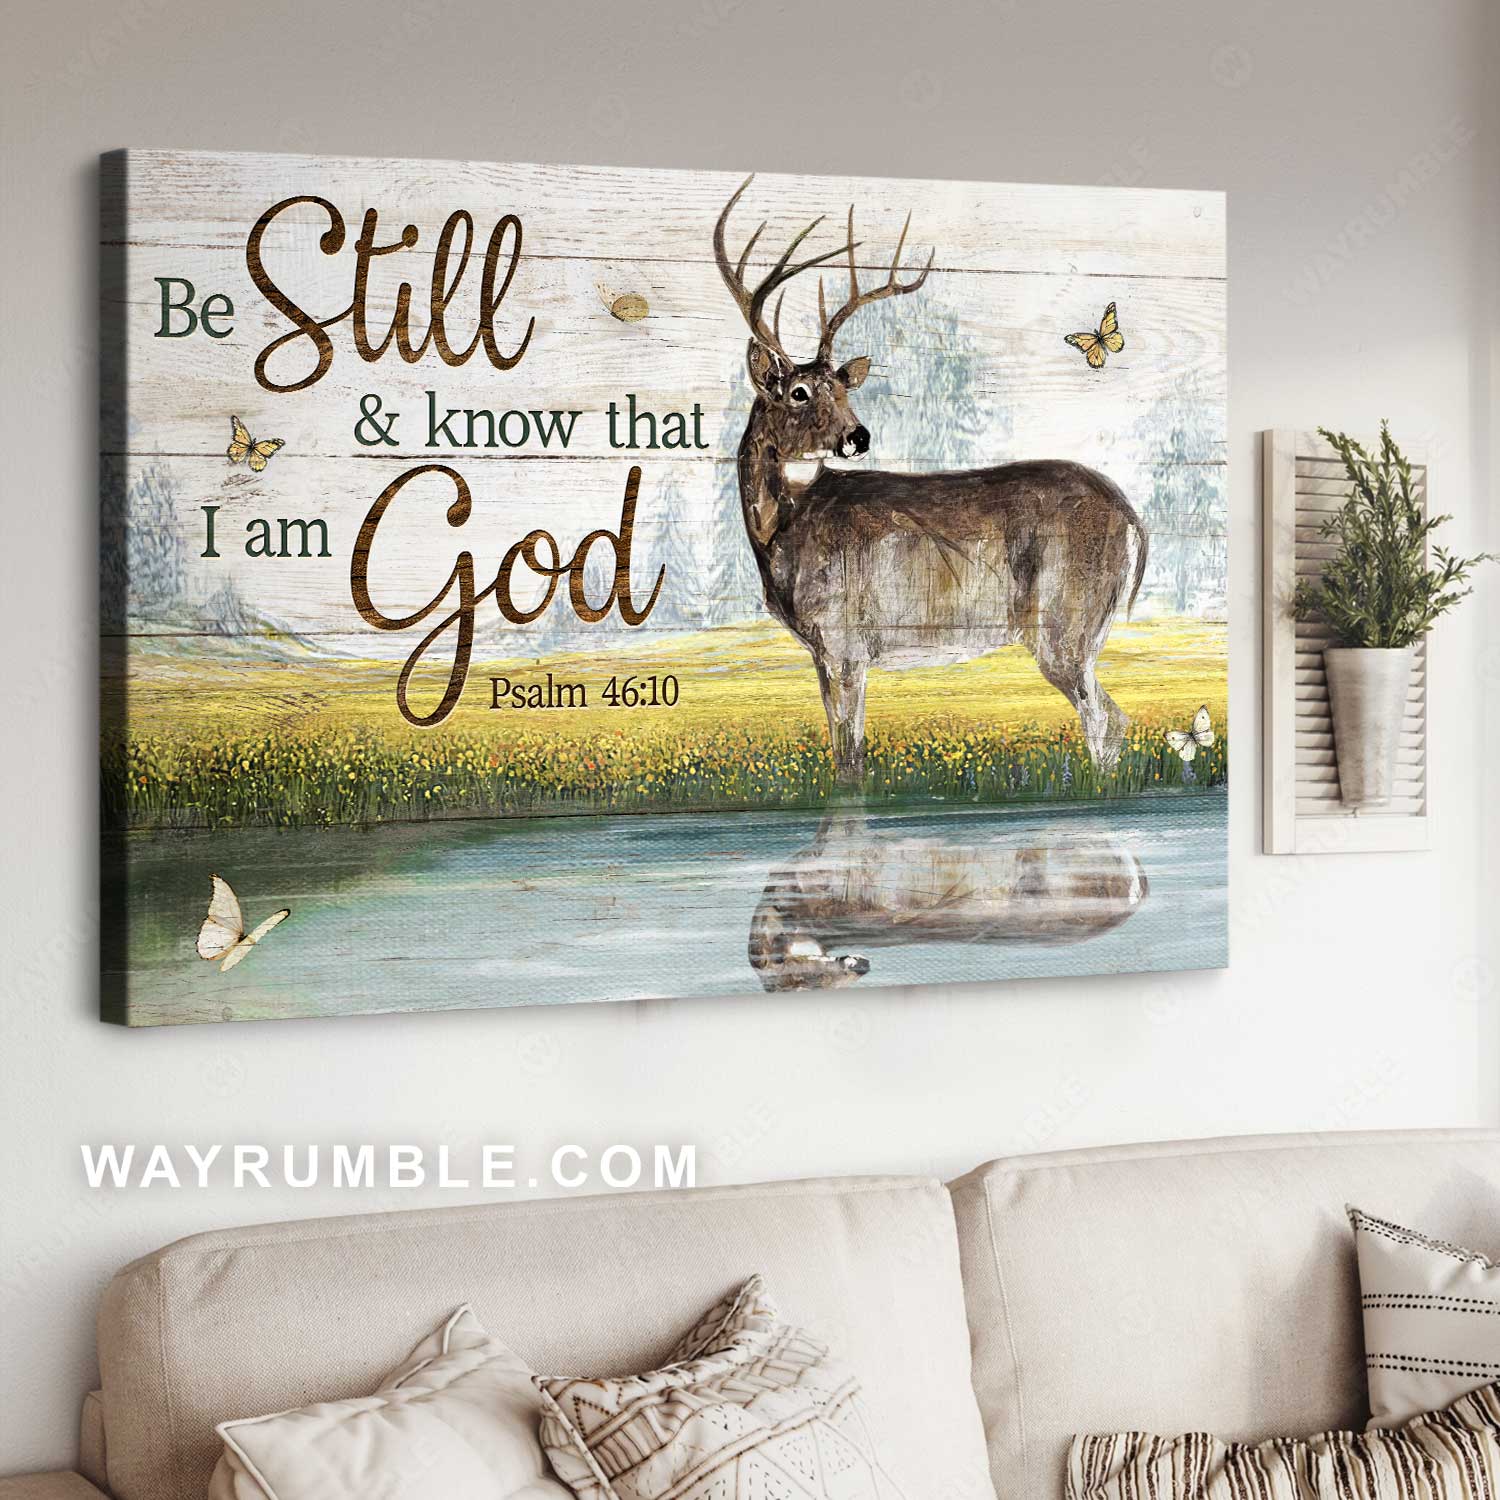 Deer painting, Wild animal, Peaceful flower field, Be still & know that I am God - Jesus Landscape Canvas Prints, Home Decor Wall Art